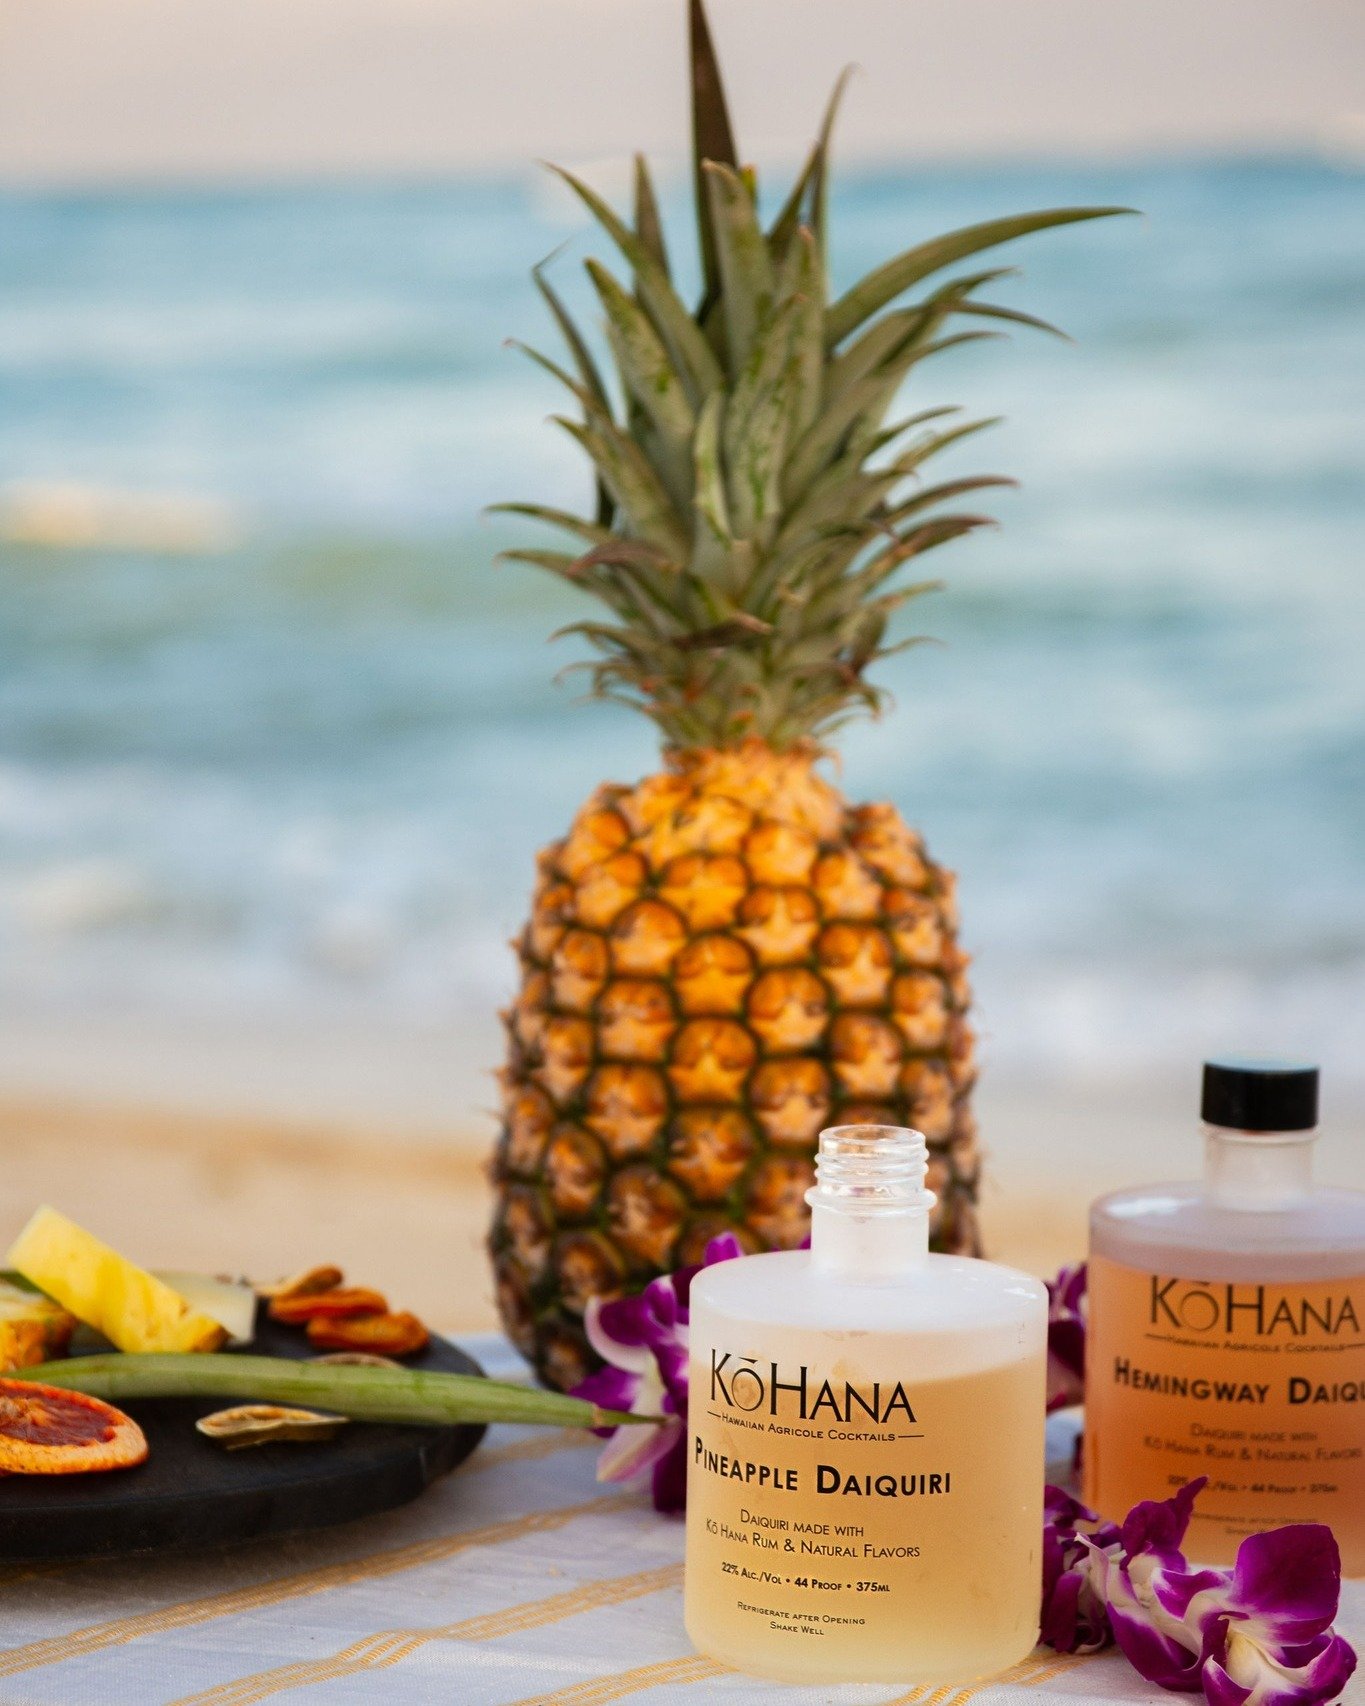 This Mother's Day, treat Mom to a taste of paradise with Kō Hana Rum! 🌺 While all moms dream of tropical vacations, if you can't whisk her away to an island this year, a sip of Kō Hana Rum is the next best thing. Transport her with every sip to sand